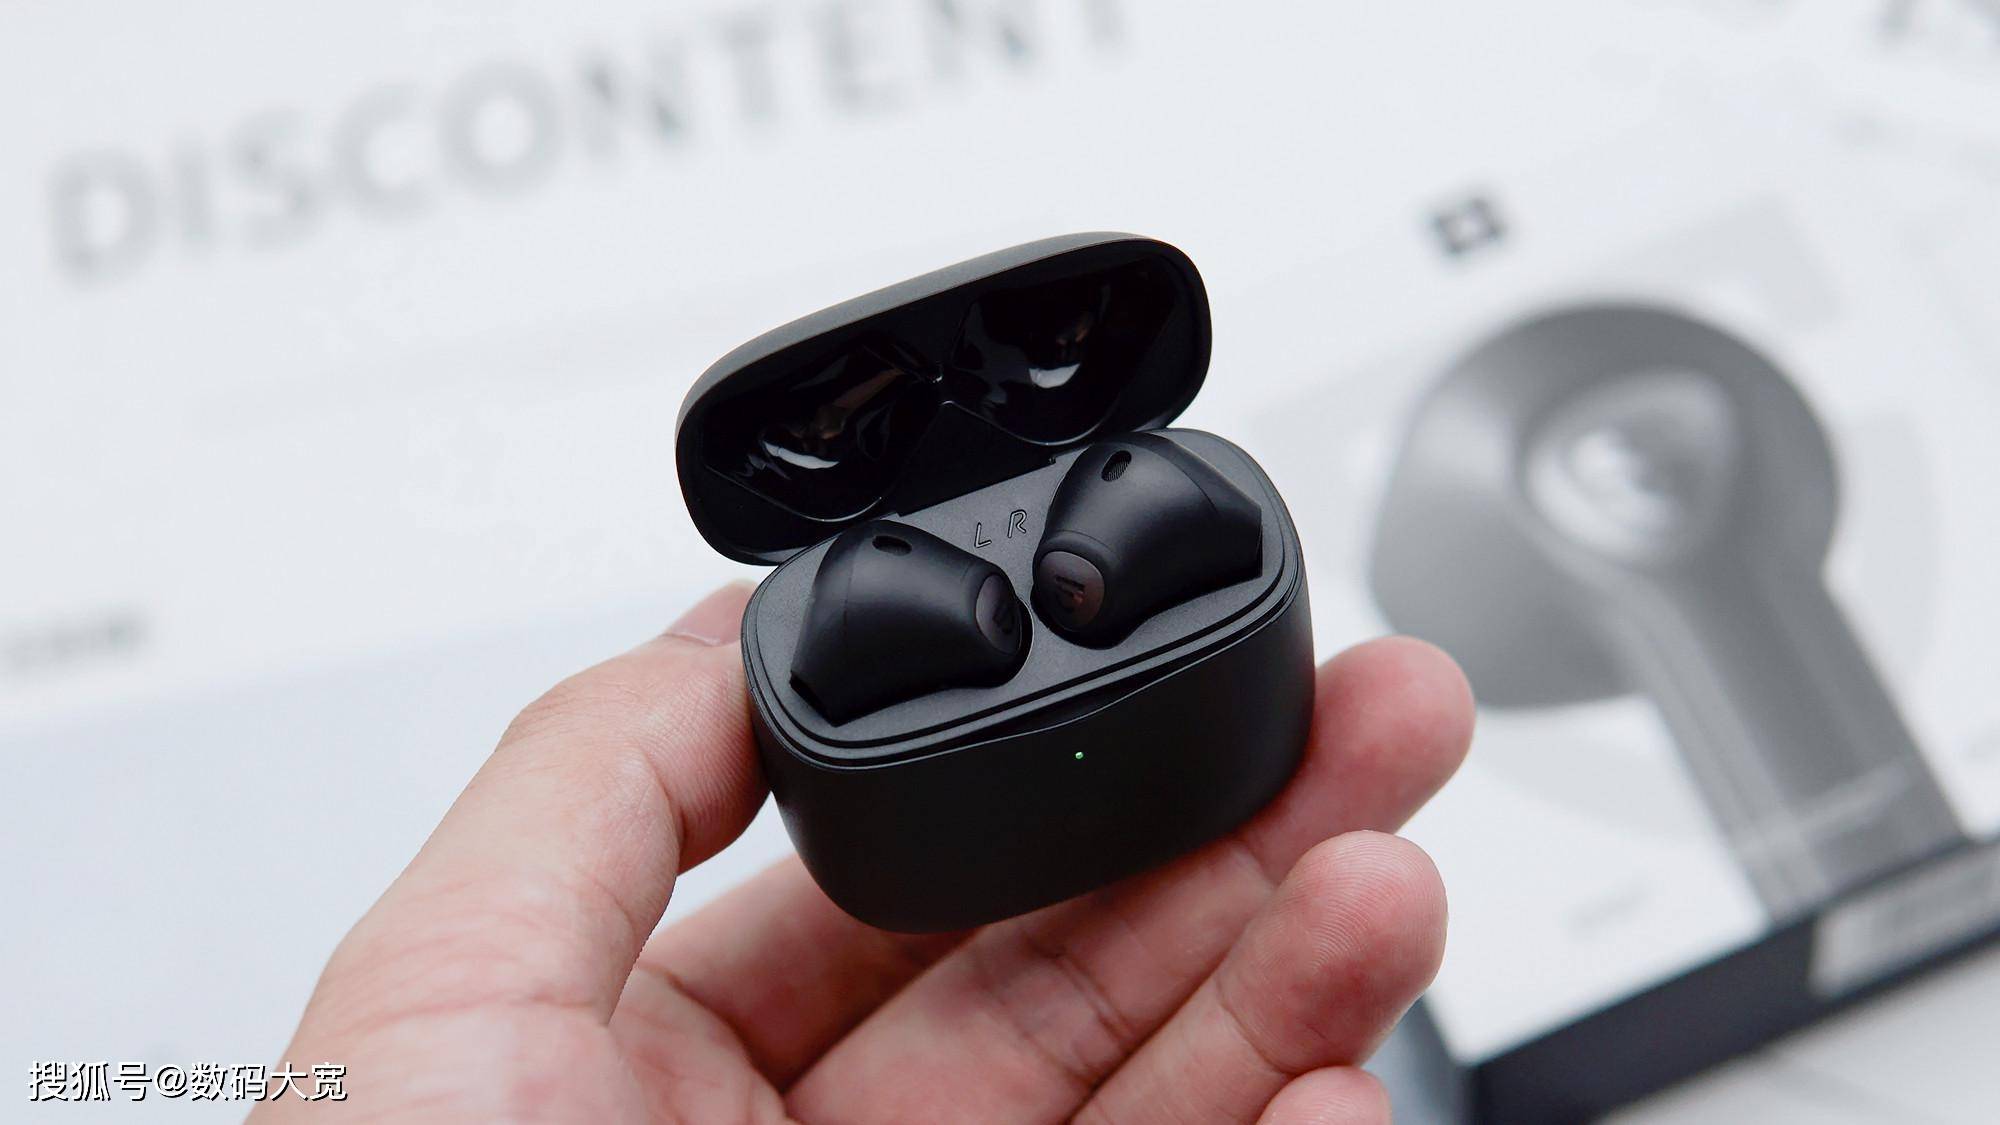 No AirPods 3 yet? Nab these new SoundPeats buds for $37.49 instead